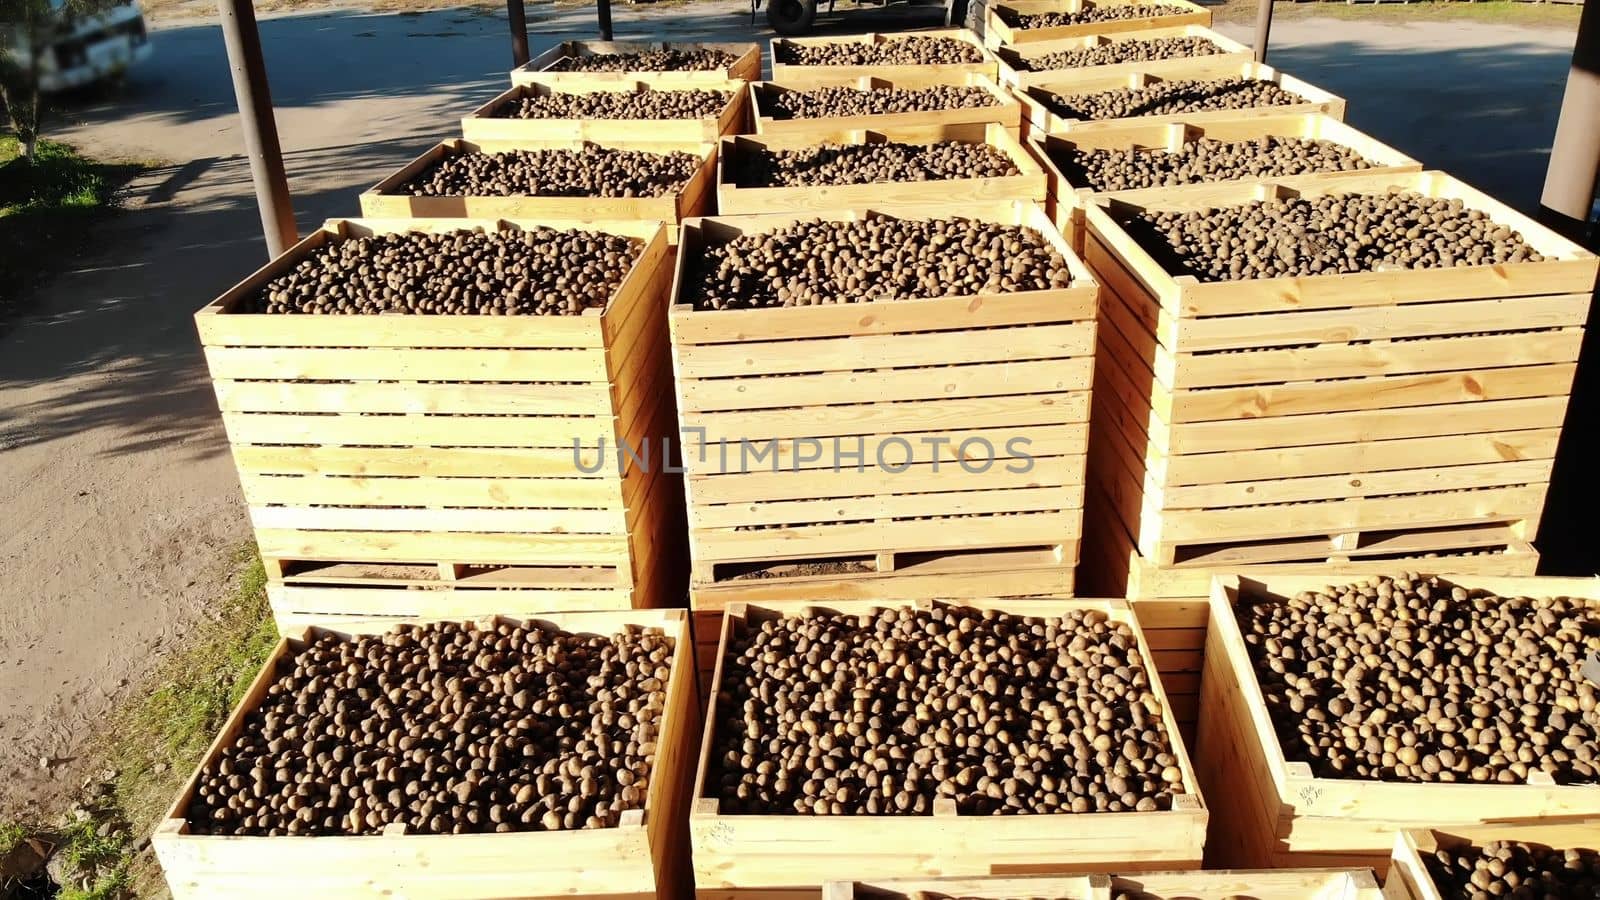 harvested potatoes standing in large wooden containers, boxes, filled to top. potatoes waiting to go to market for sale. annual potatoes harvesting period on farm. agricultural production sector. High quality photo